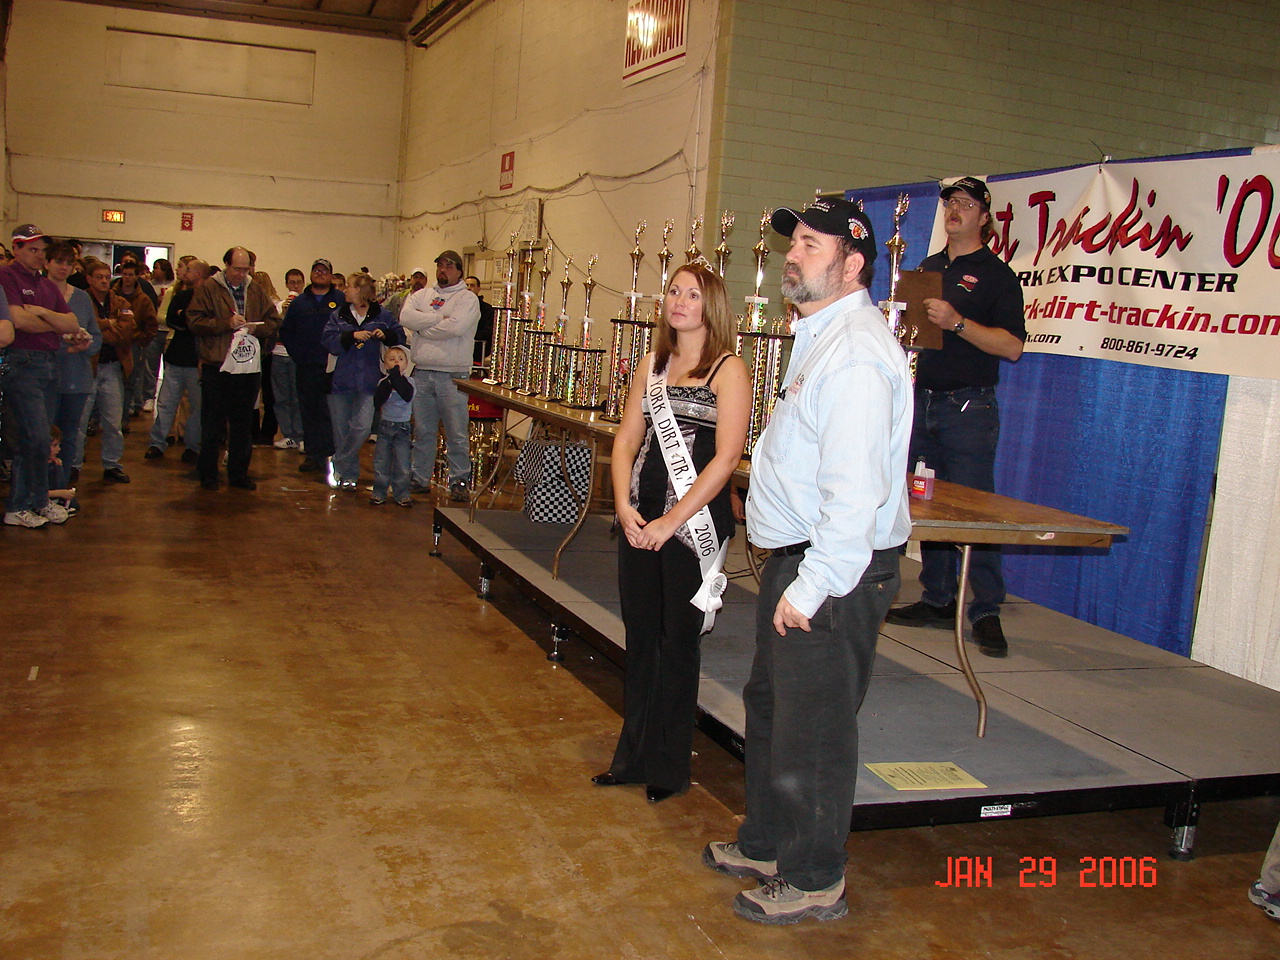 Kirk & Ms. Dirt Trackin' addressing the crowd
